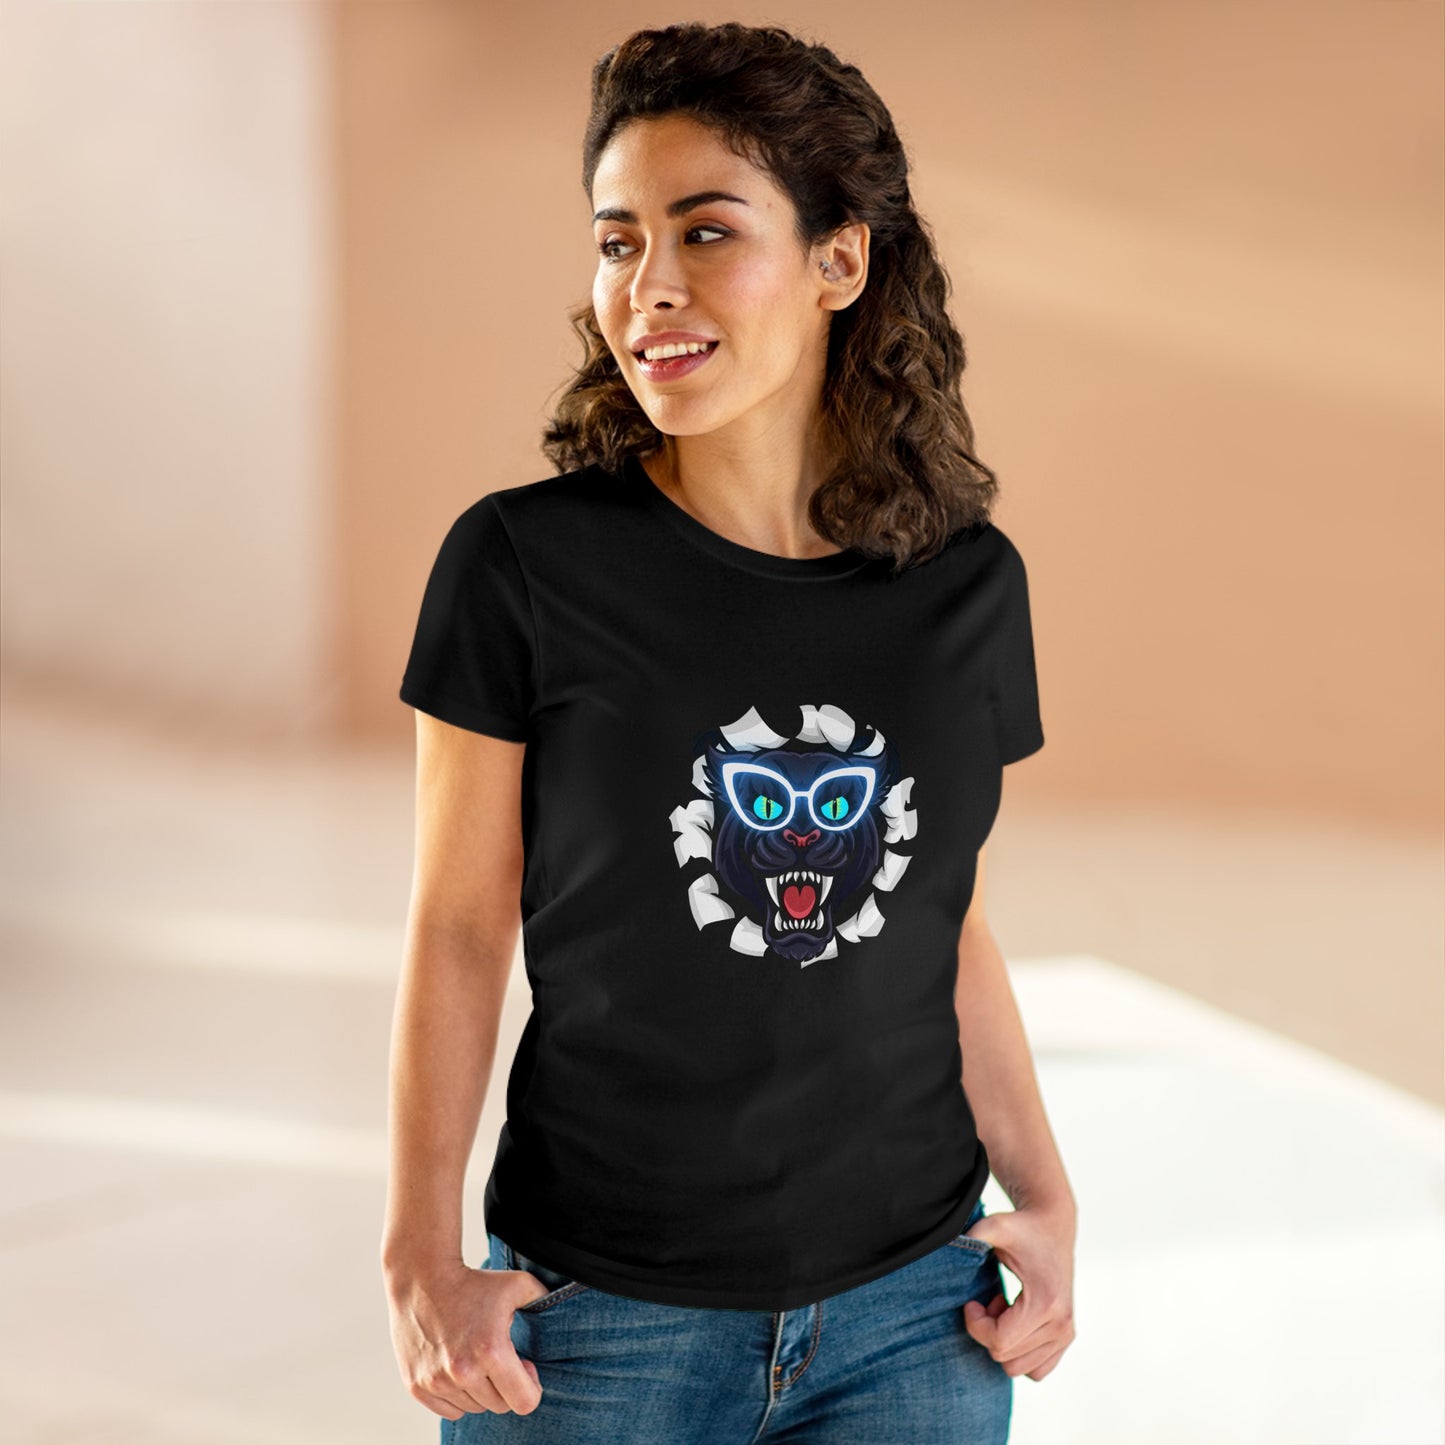 Holidays, Halloween, Animals, Felines, Funny, Sports, Panthers- Adult, Semi-fitted, Smaller Size Image, T-shirt